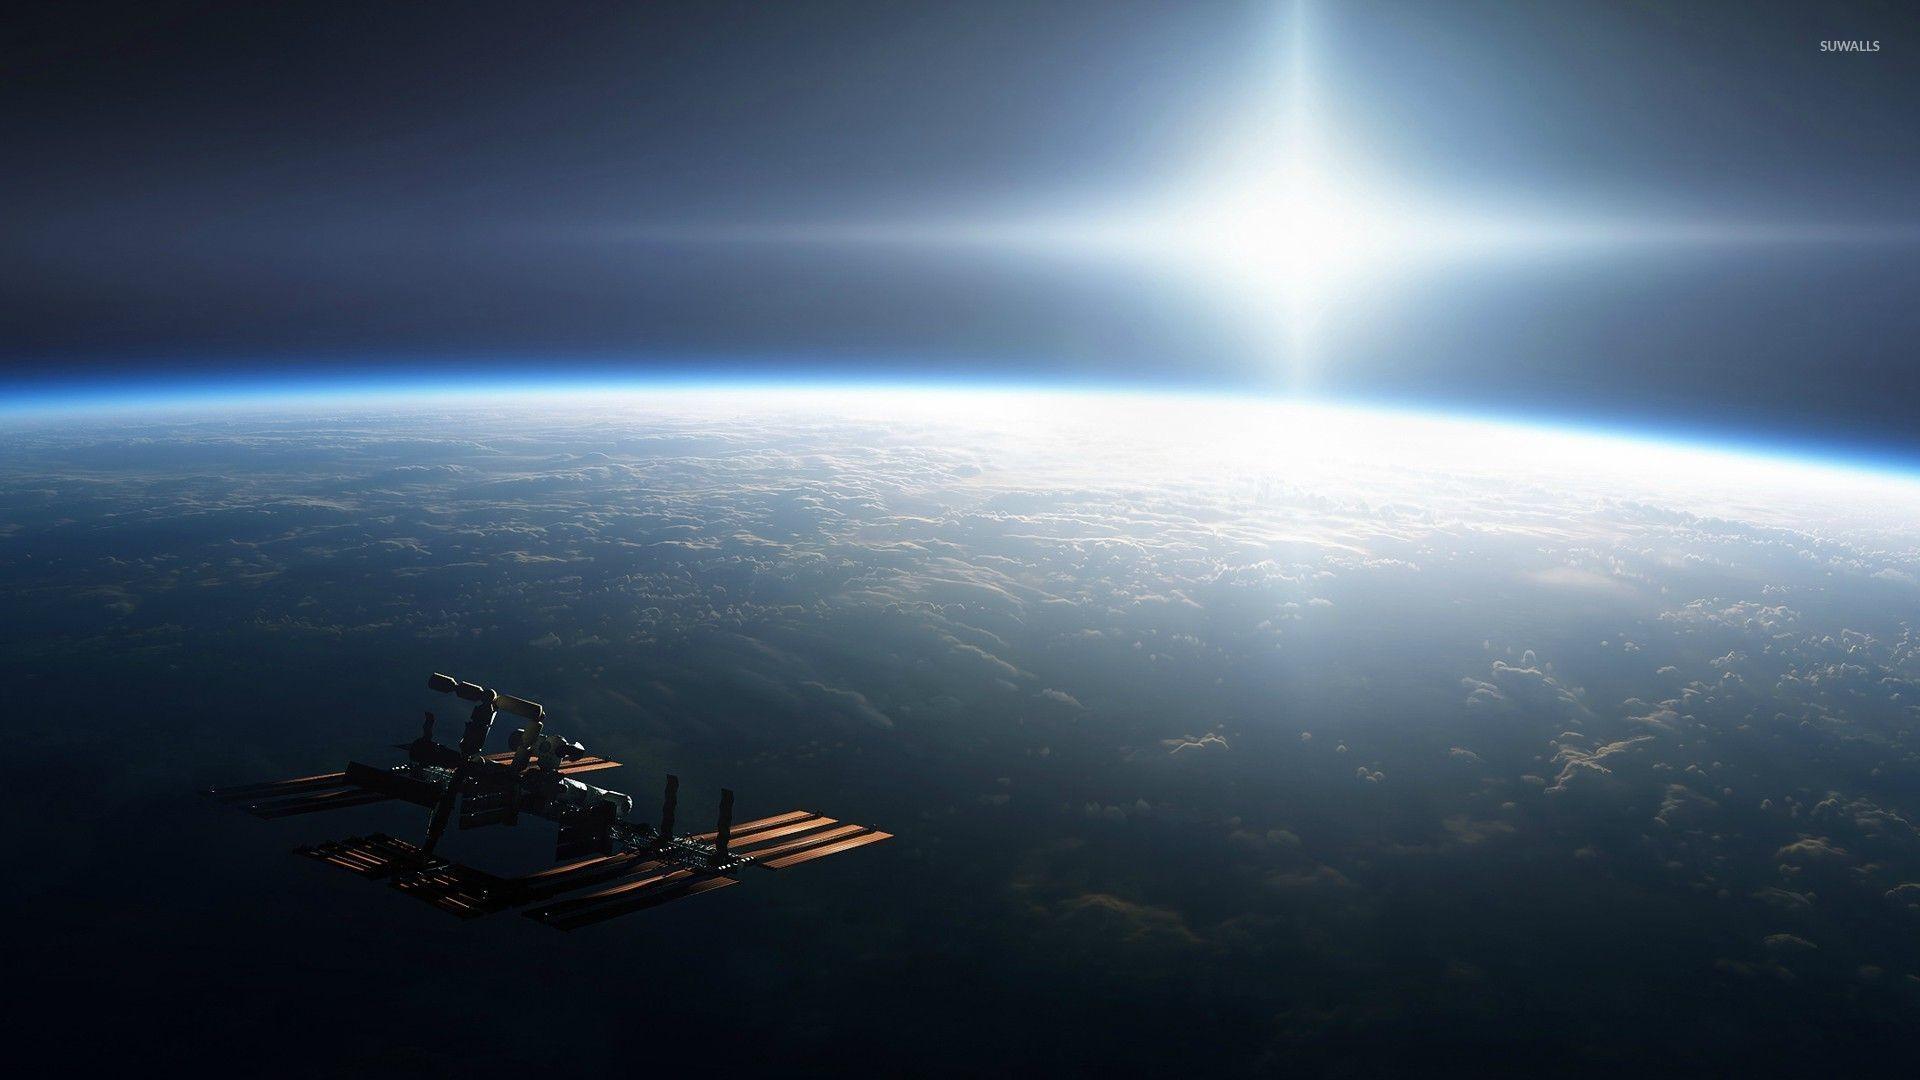 Earth From Space Wallpaper 1920x1080